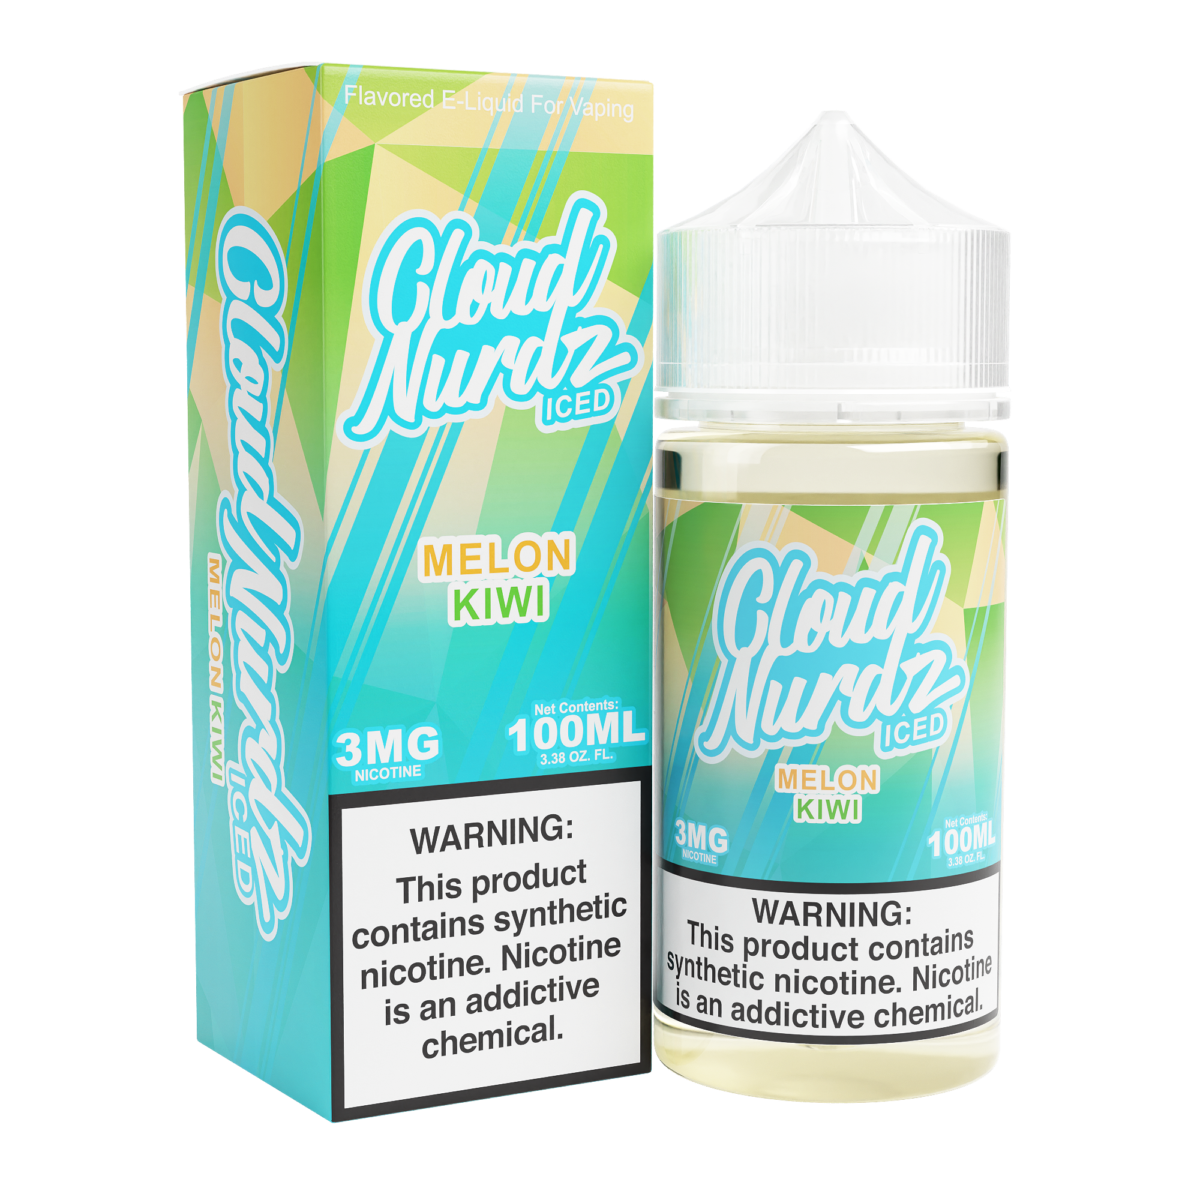 Kiwi Melon ICED by Cloud Nurdz Series 100mL with Packaging